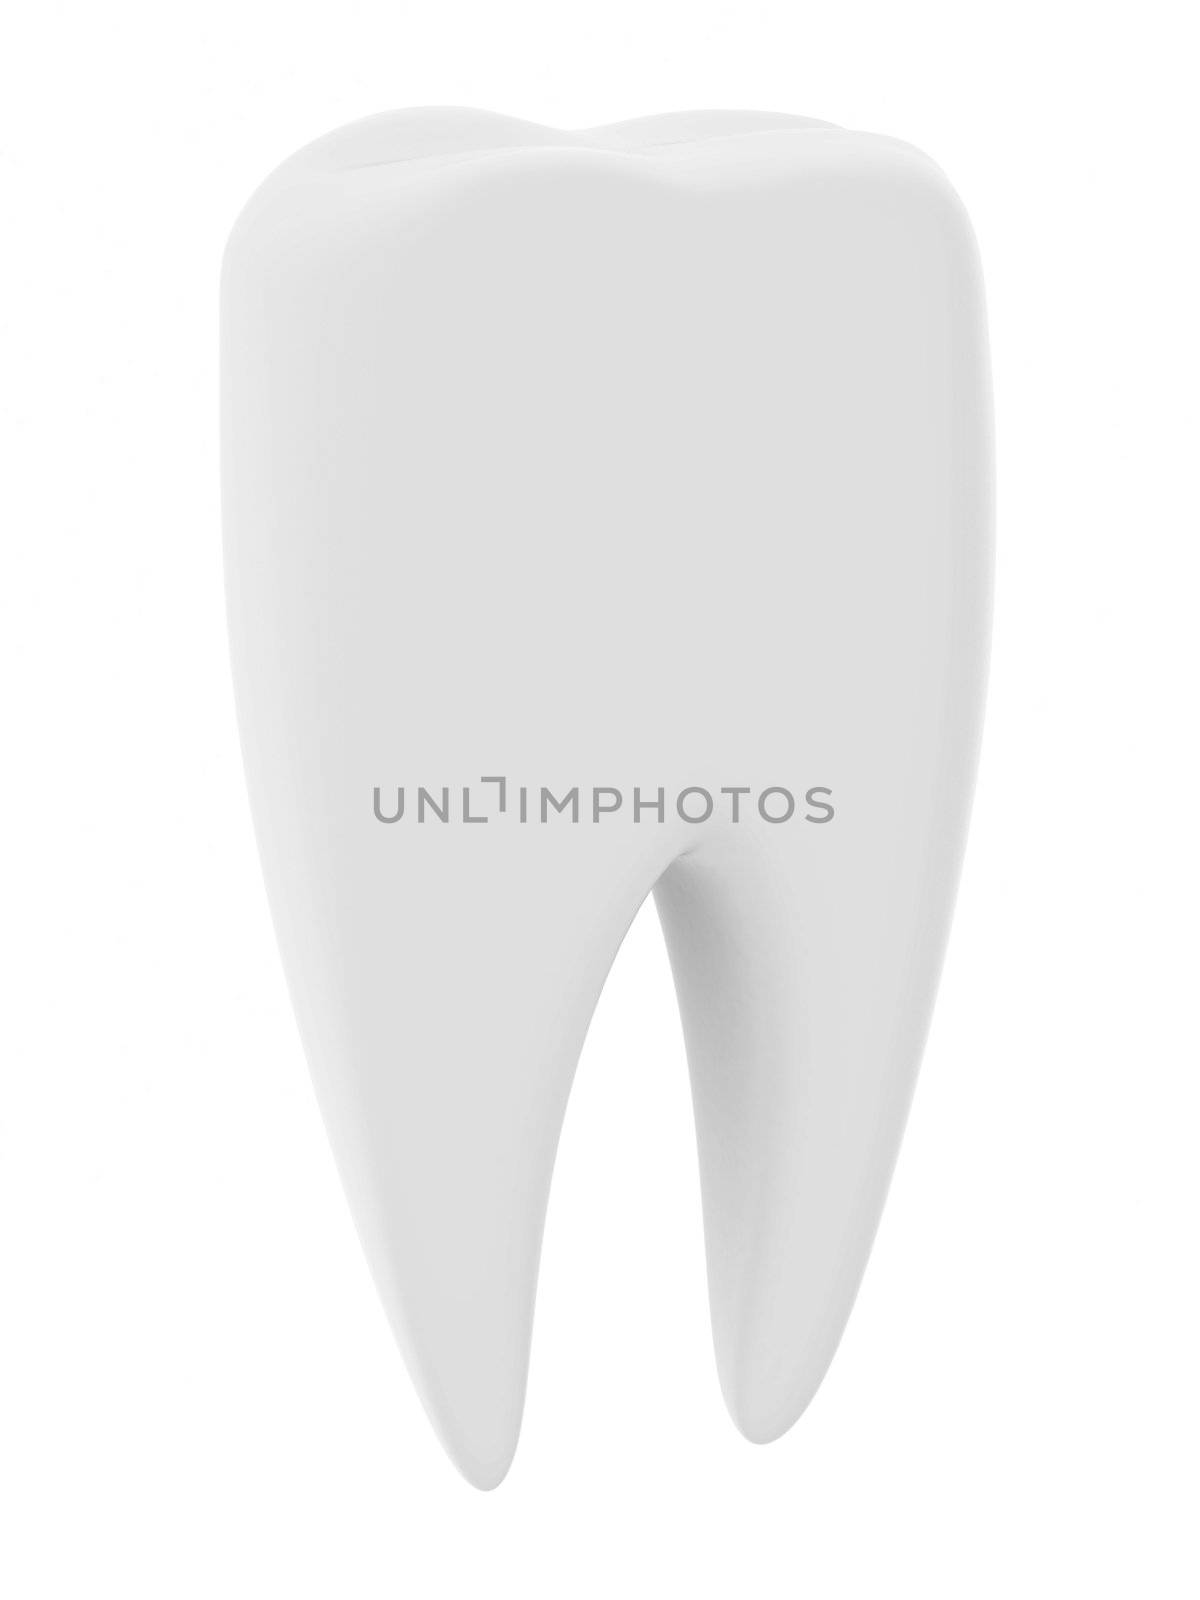 Tooth isolated on white background. High resolution 3D image